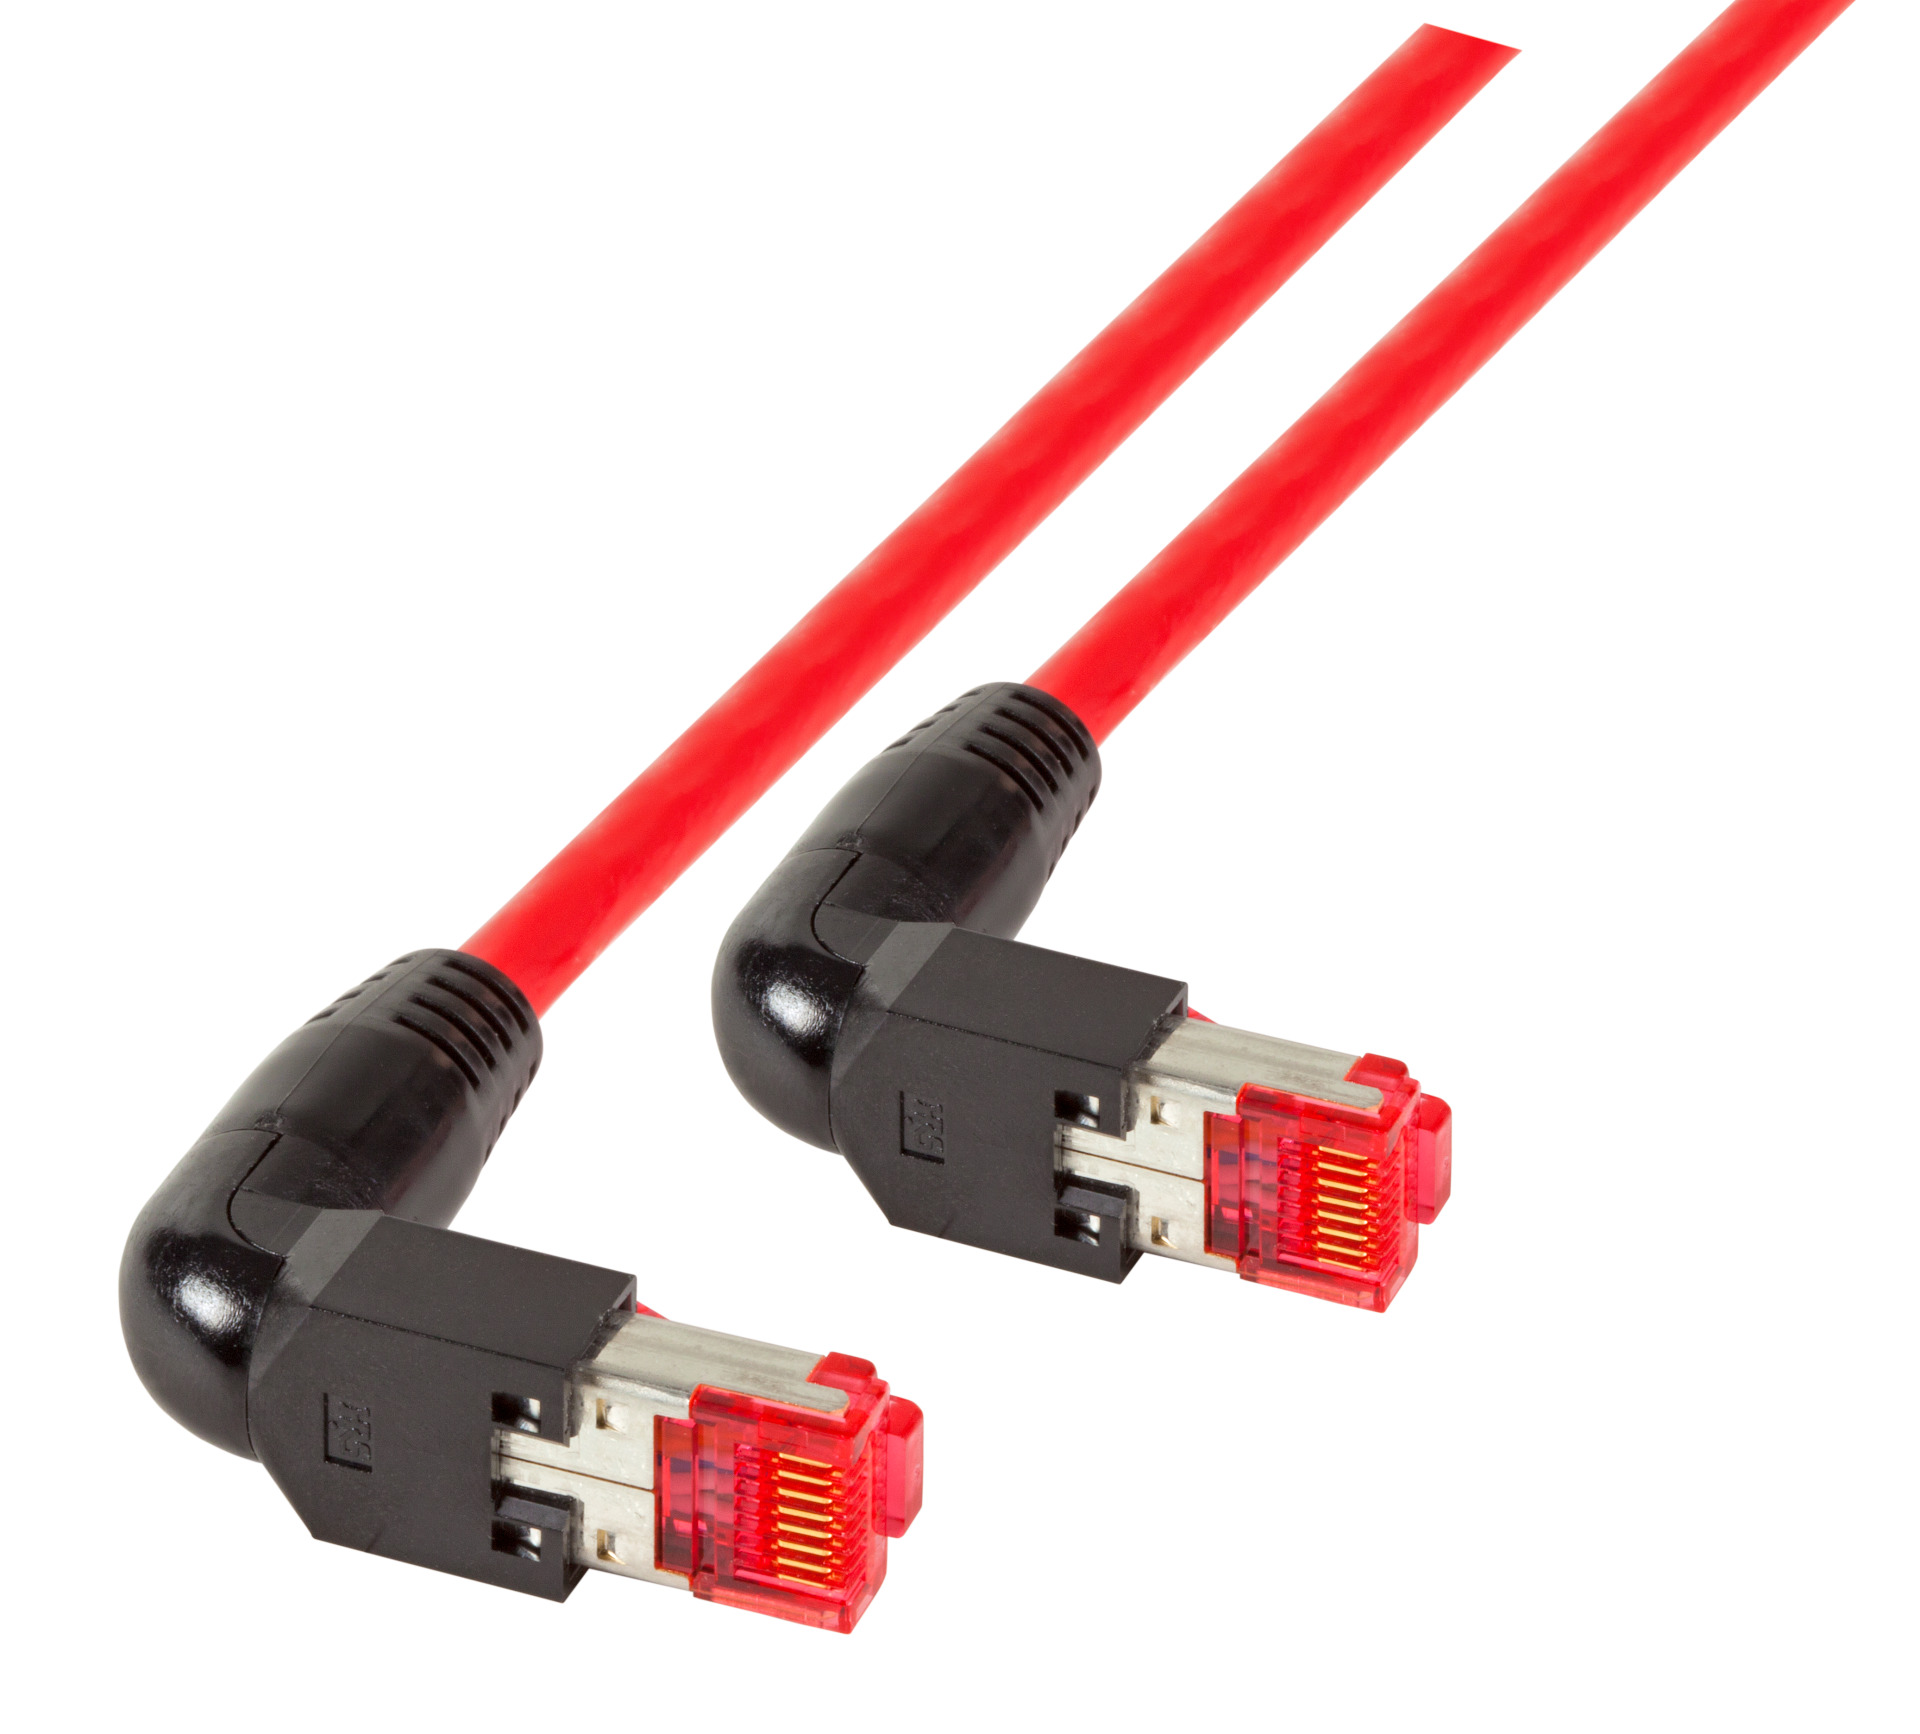 RJ45 Patch cable S/FTP, Cat.6A, 2x TM21 90°, UC900, 1m, red